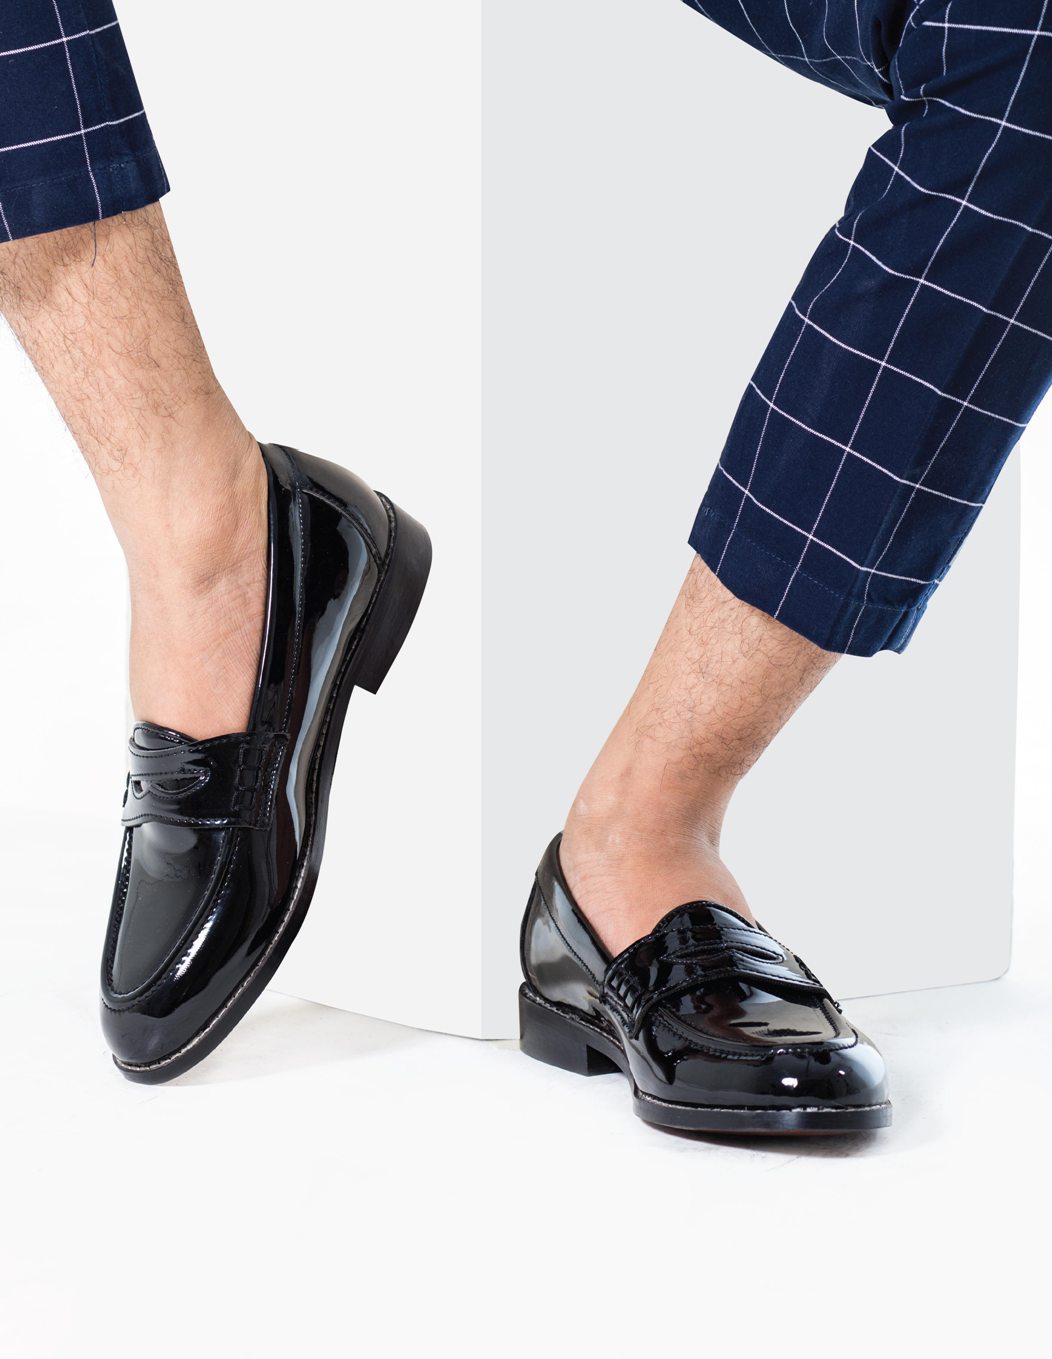 Boise Penny Loafers - Glossy Black